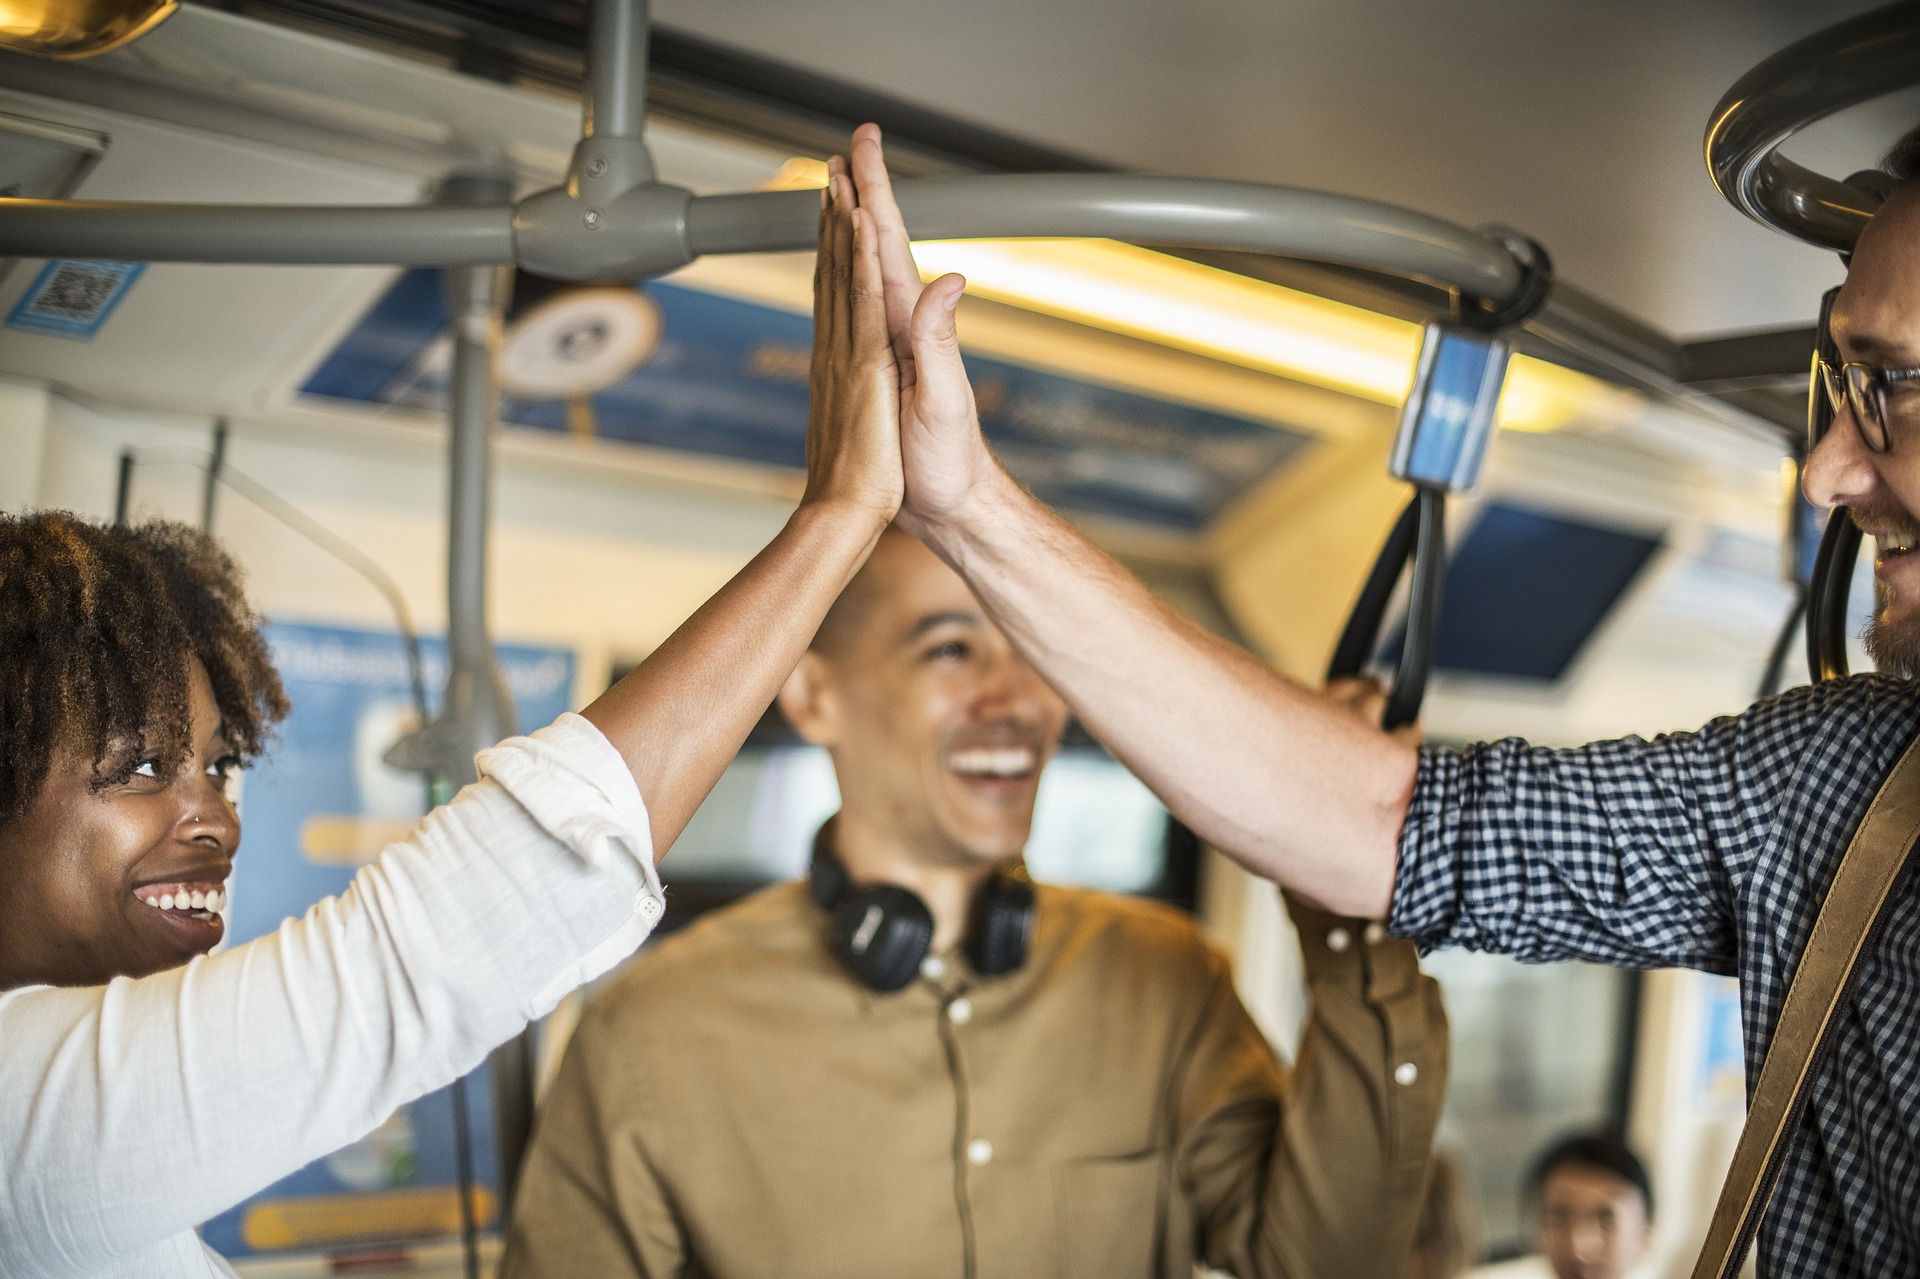 high five on the bus